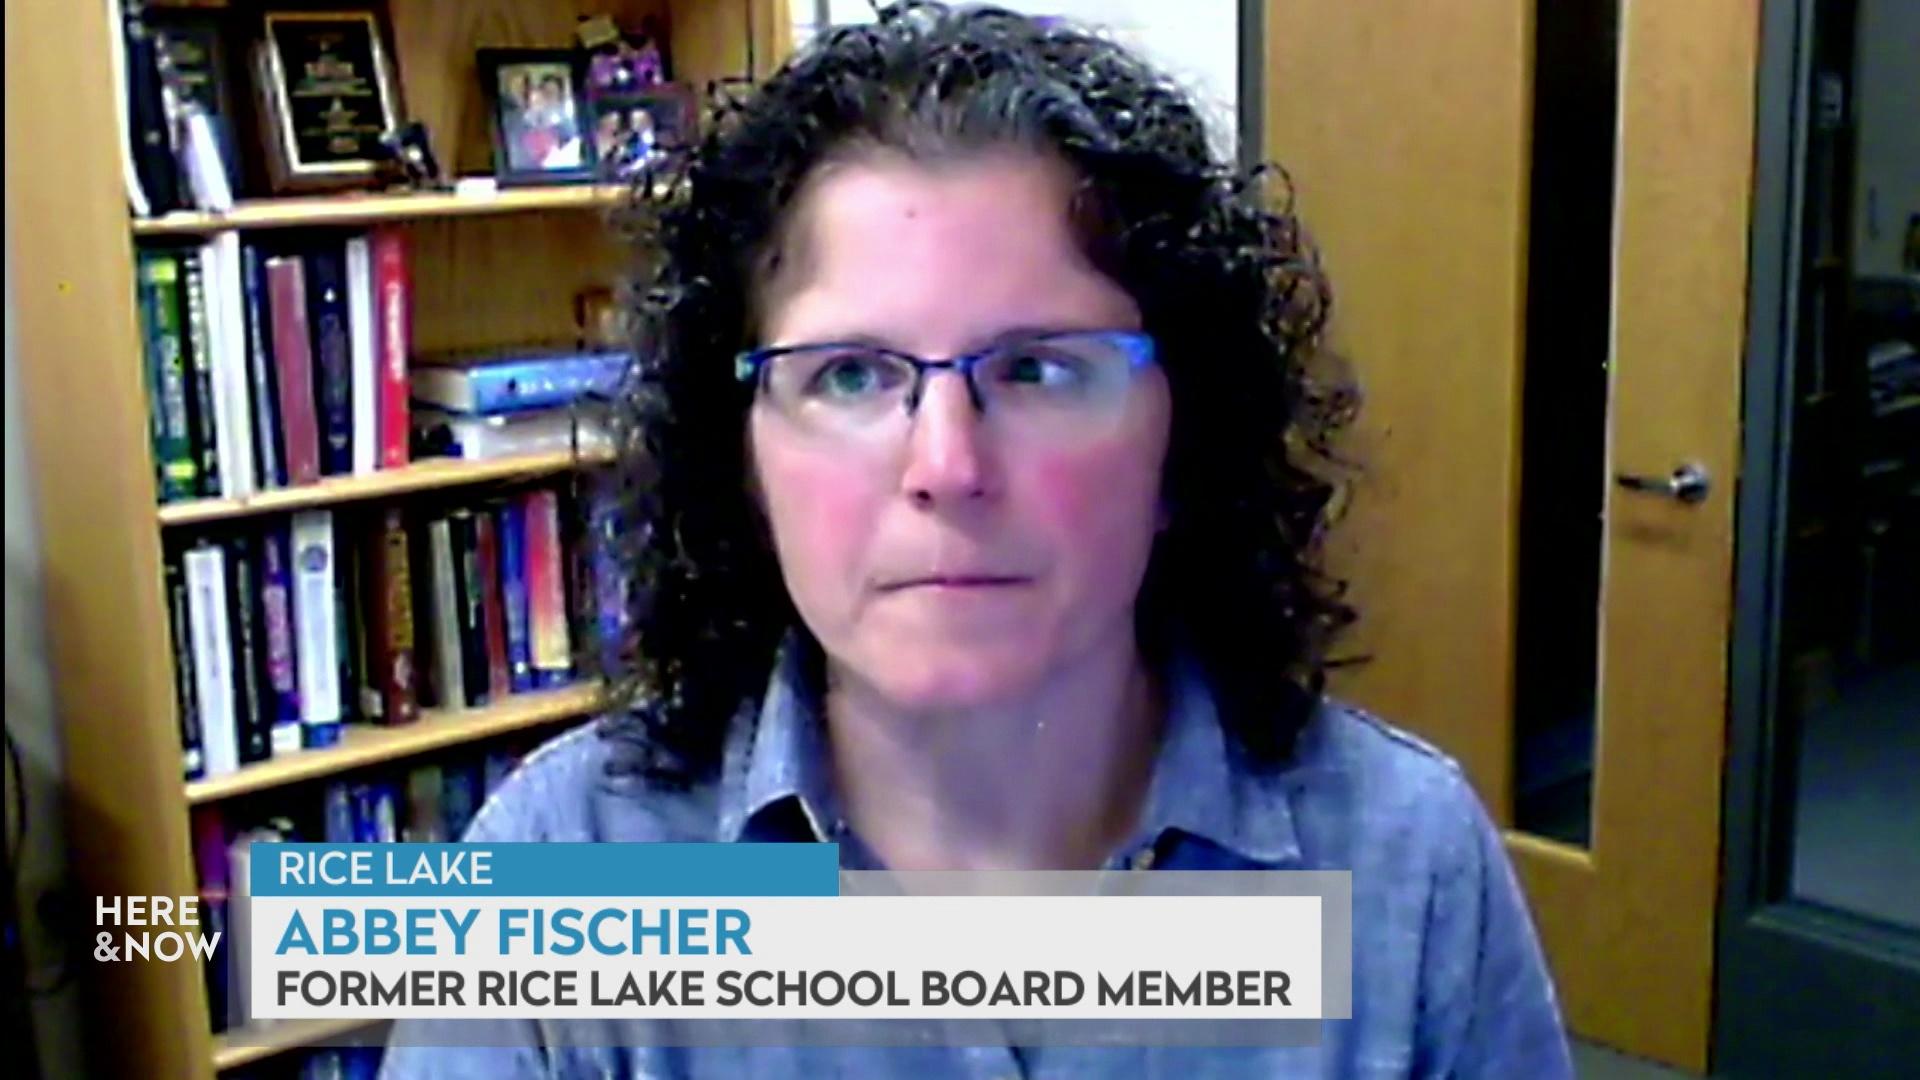 Abbey Fischer on culture war over LGBTQ issues in schools